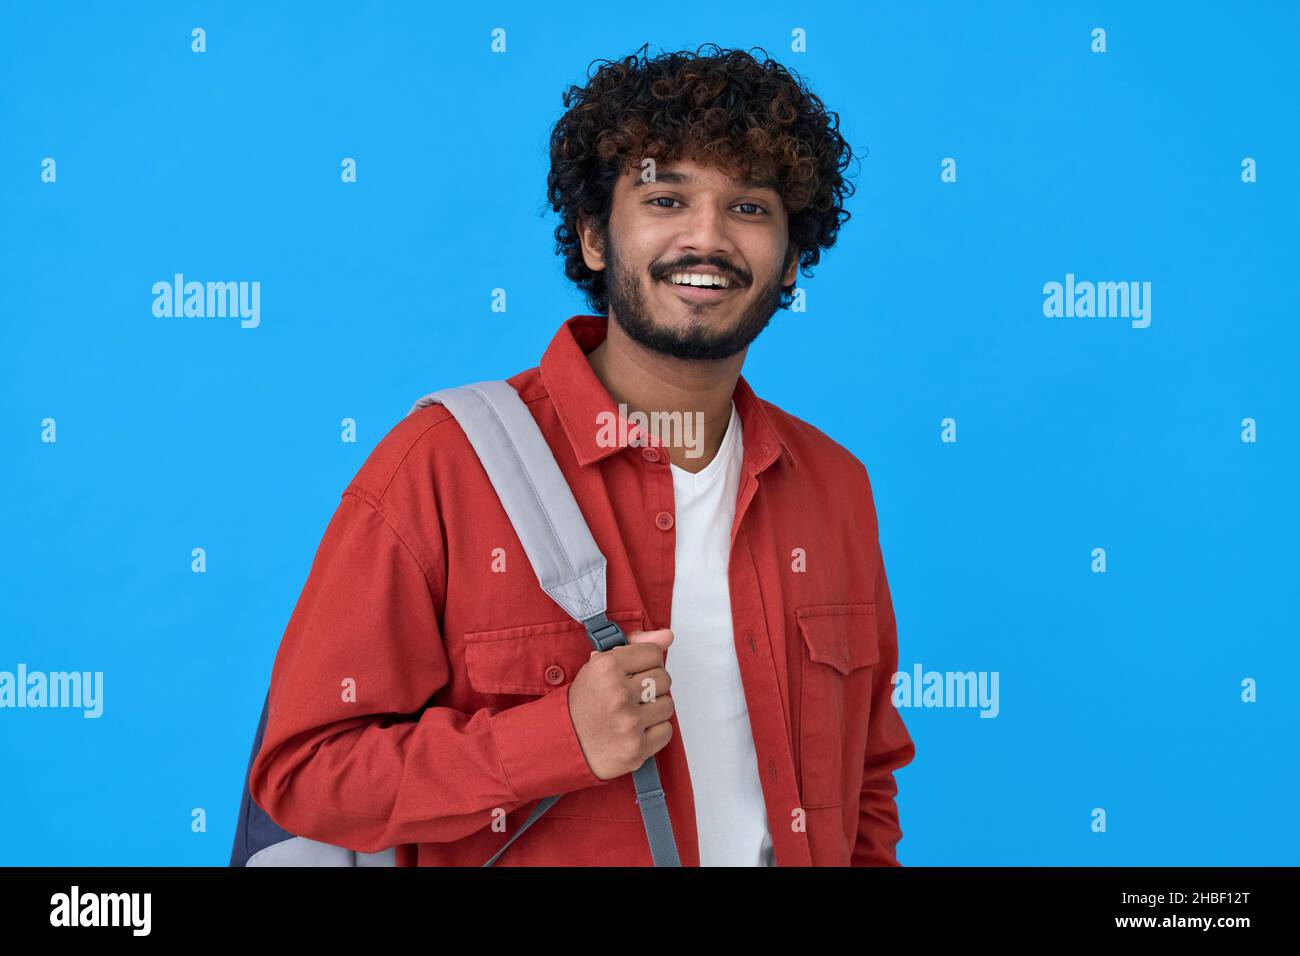 Happy young indian guy holding backpack isolated on blue background. Stock Photo